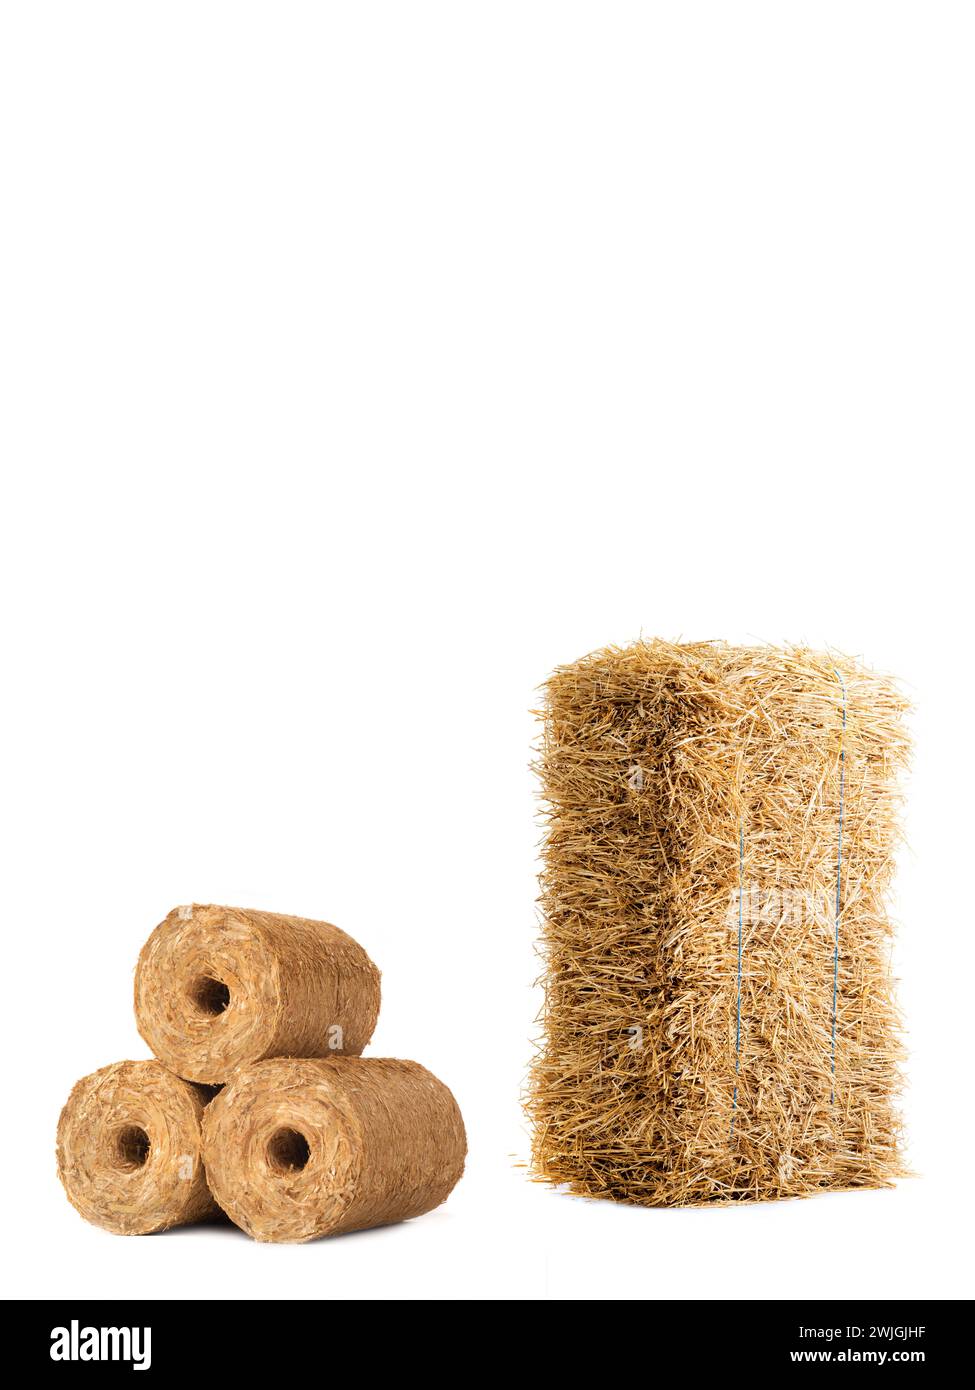 fuel briquettes of straw  isolated on a white background Stock Photo